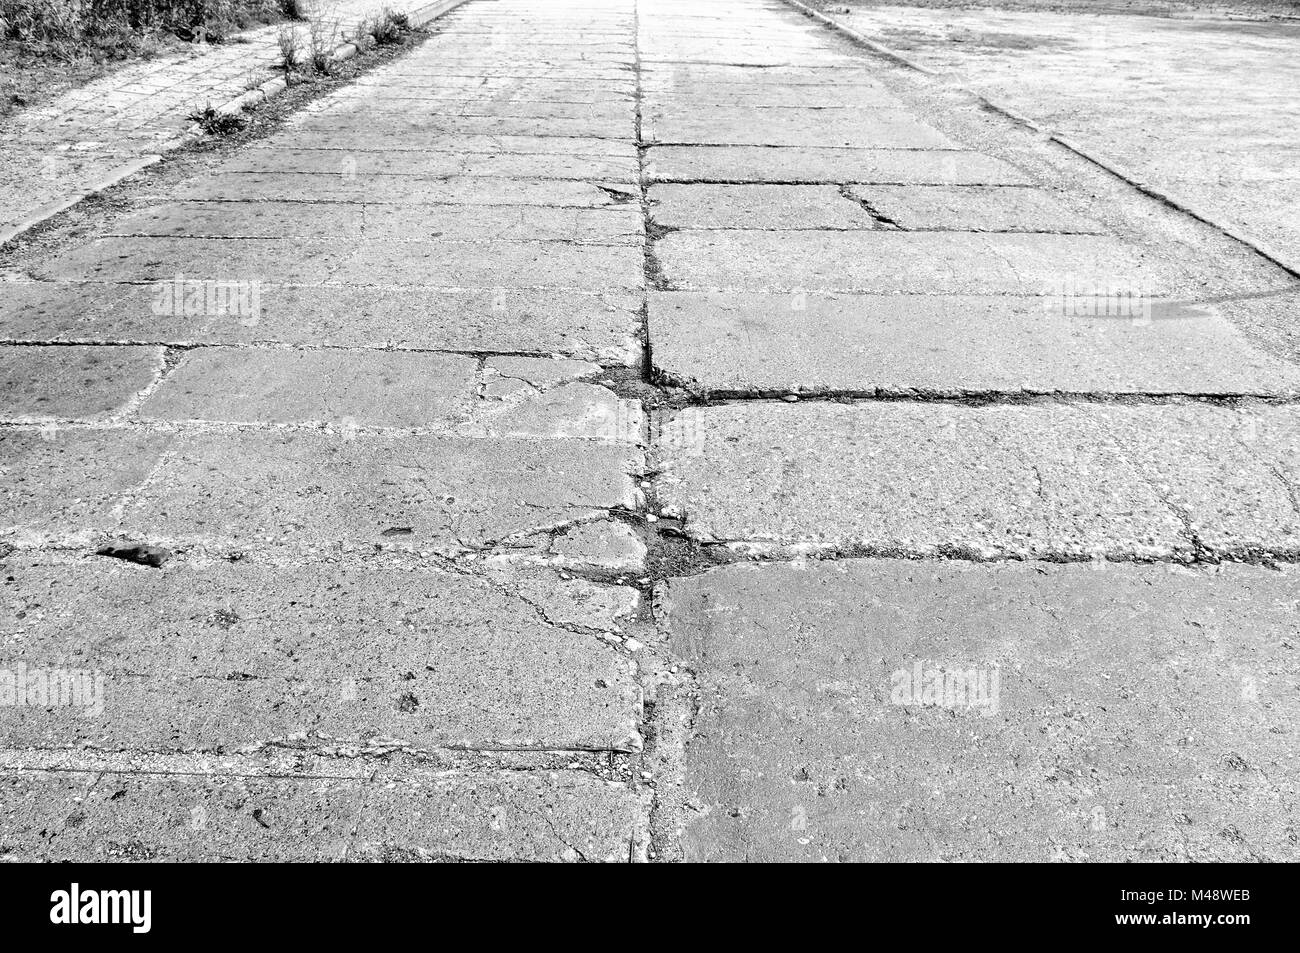 old GDR concrete roadway condition black and white Stock Photo